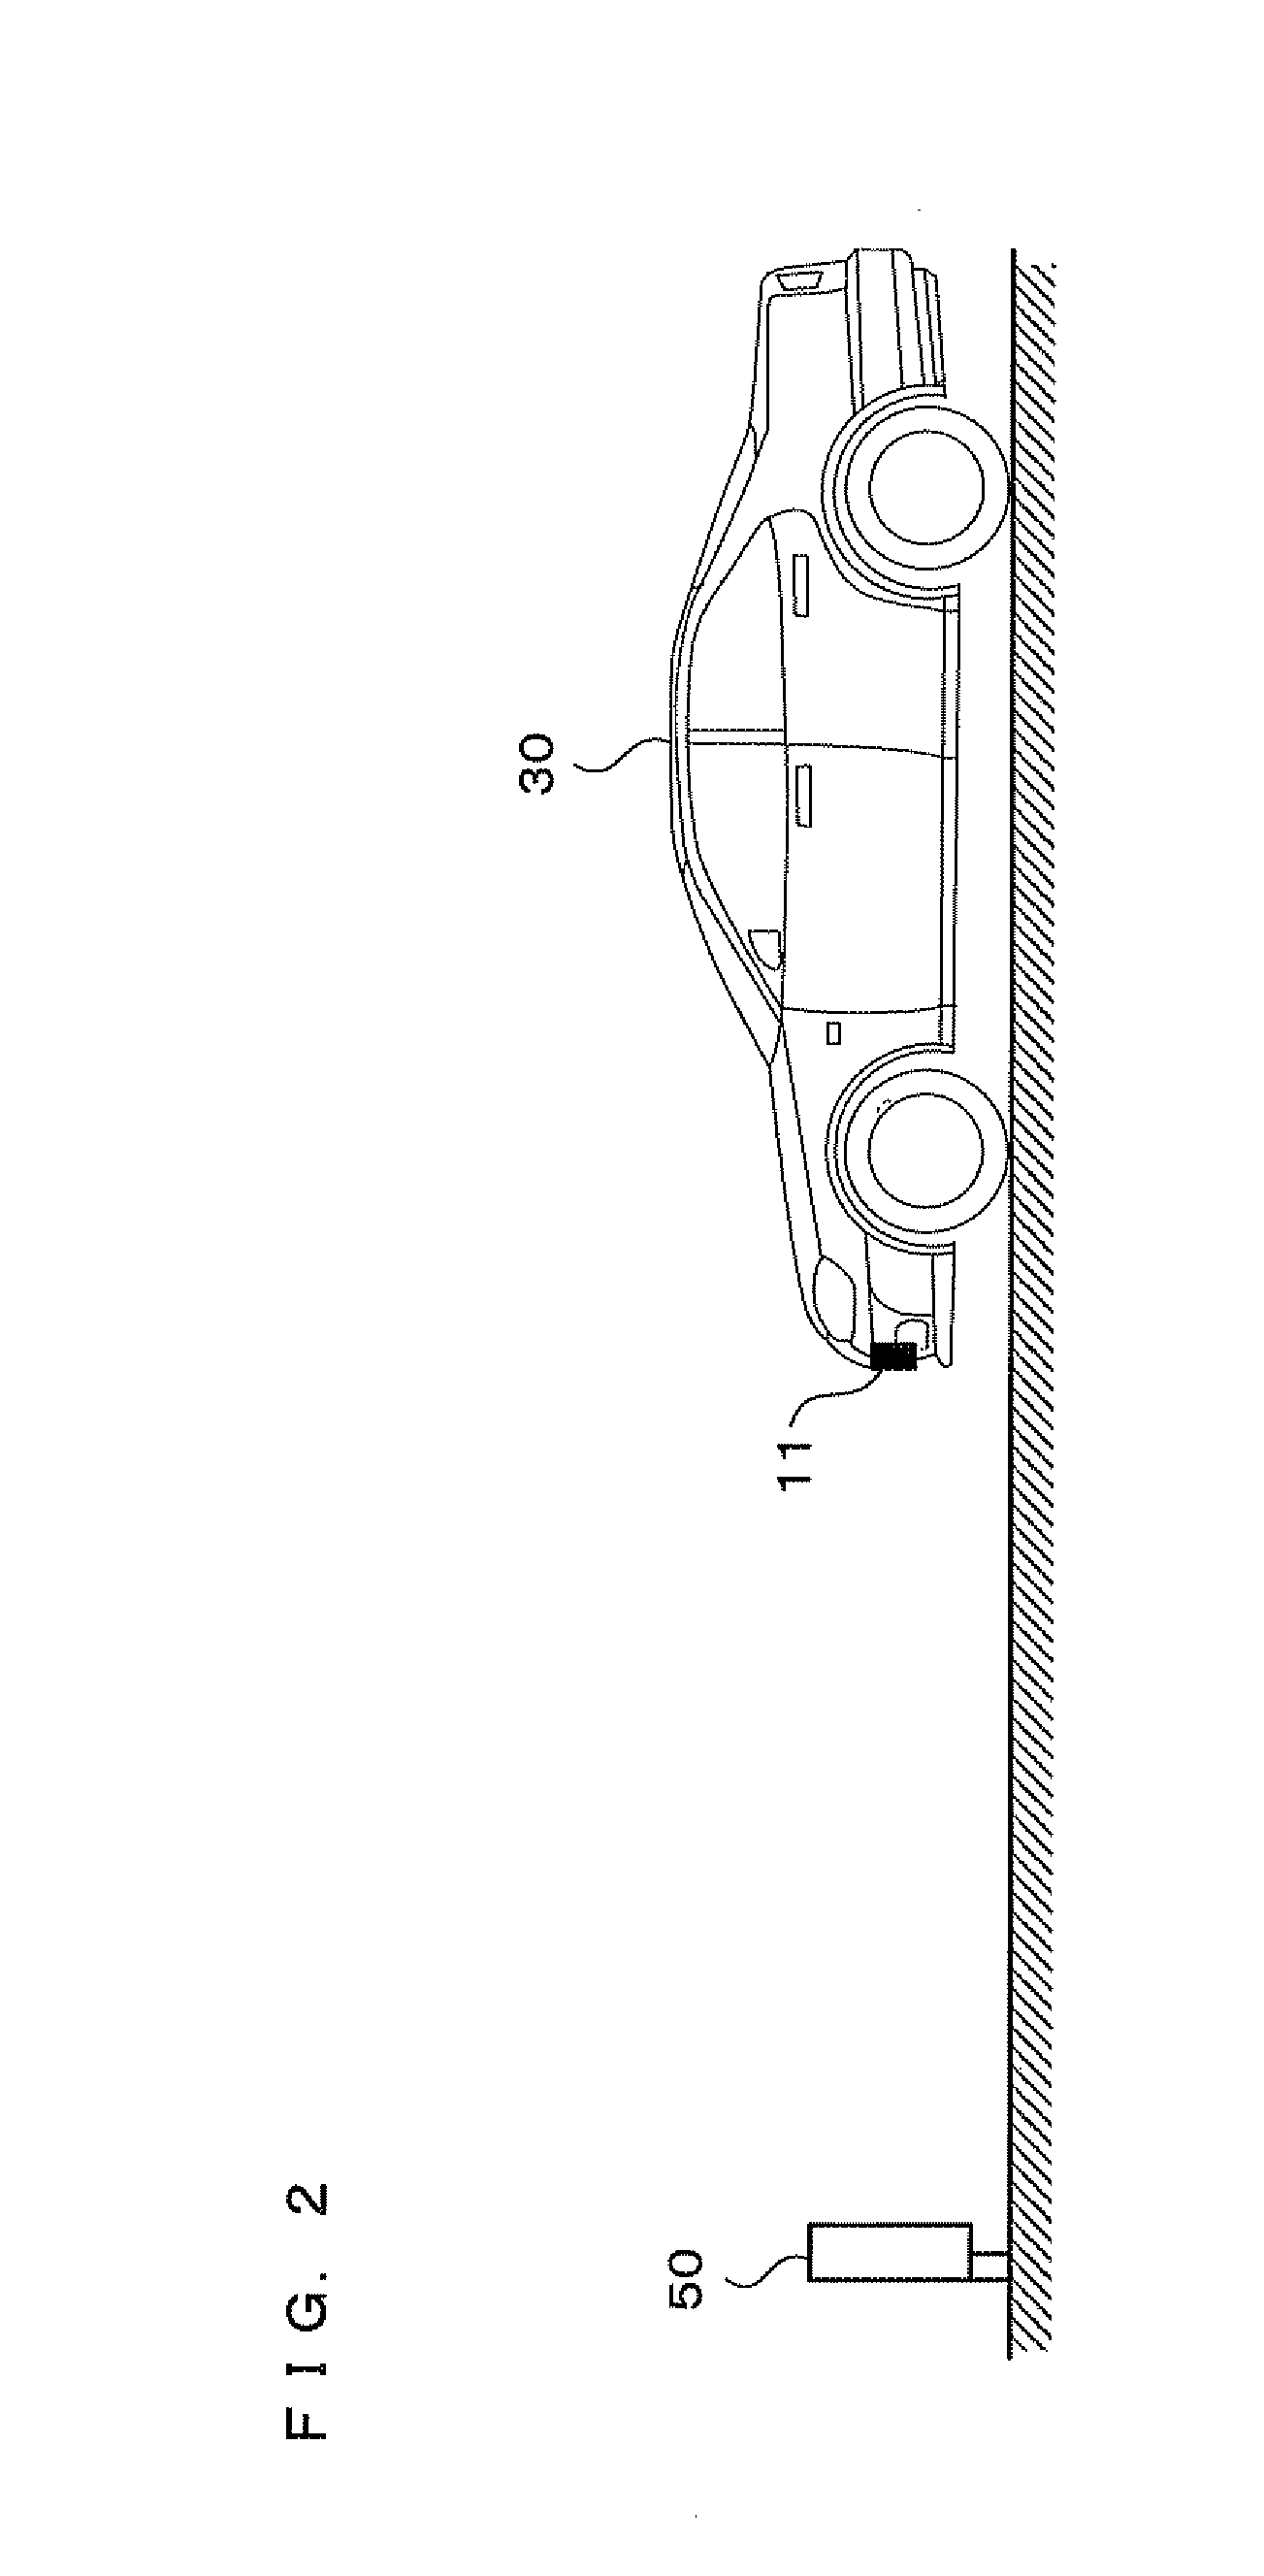 Image capturing device, adjusting device, and optical axis adjusting system for image capturing device